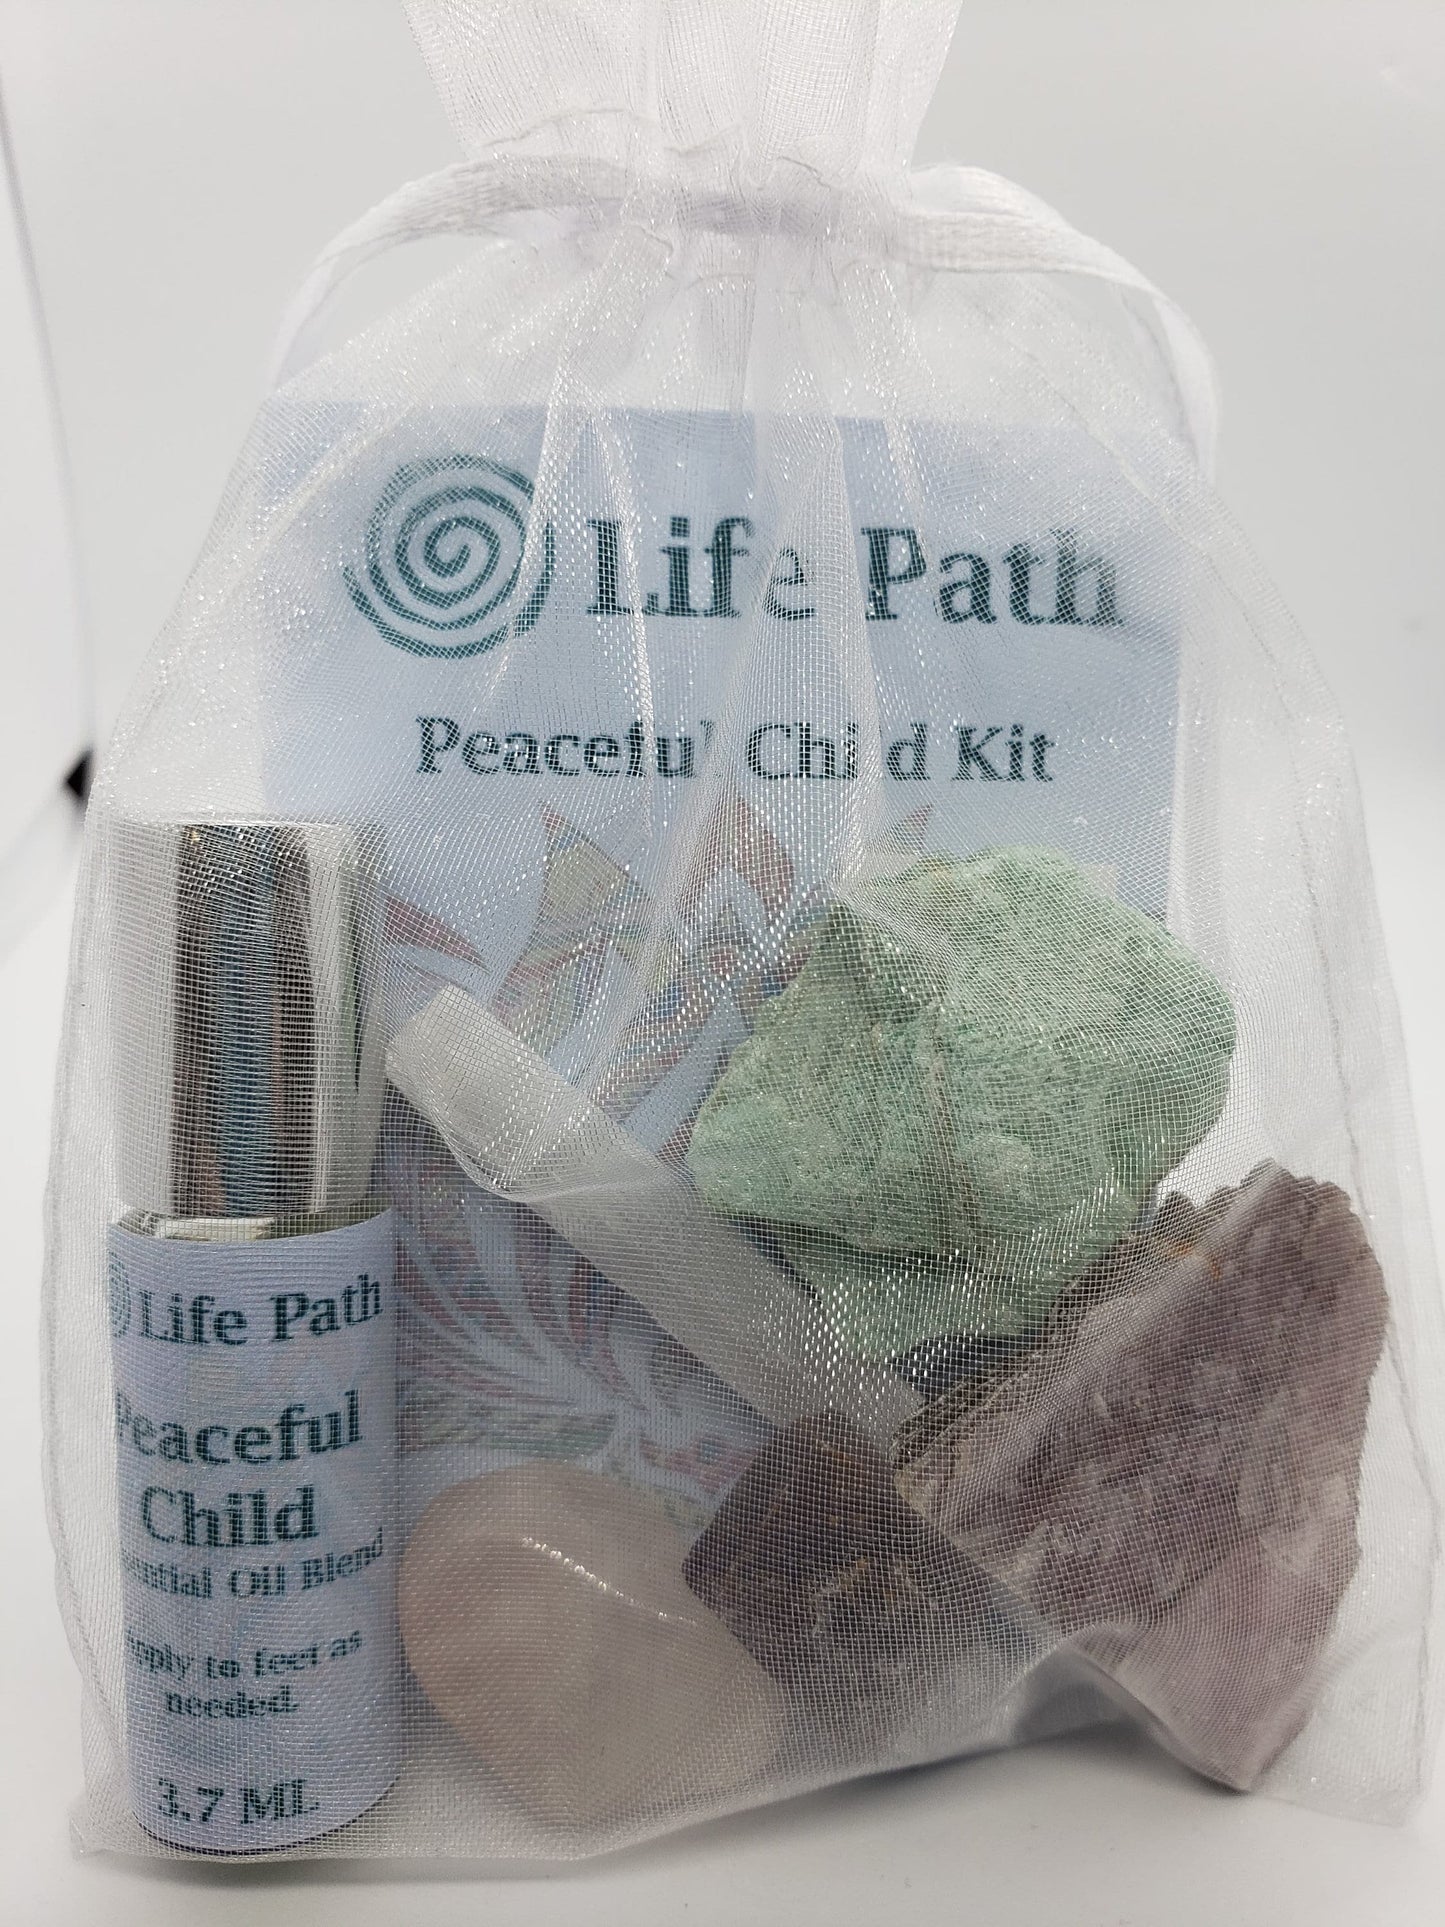 Peaceful Child Kit, Comes with Essential Oil Blend, Crystals and Affirmations 1596